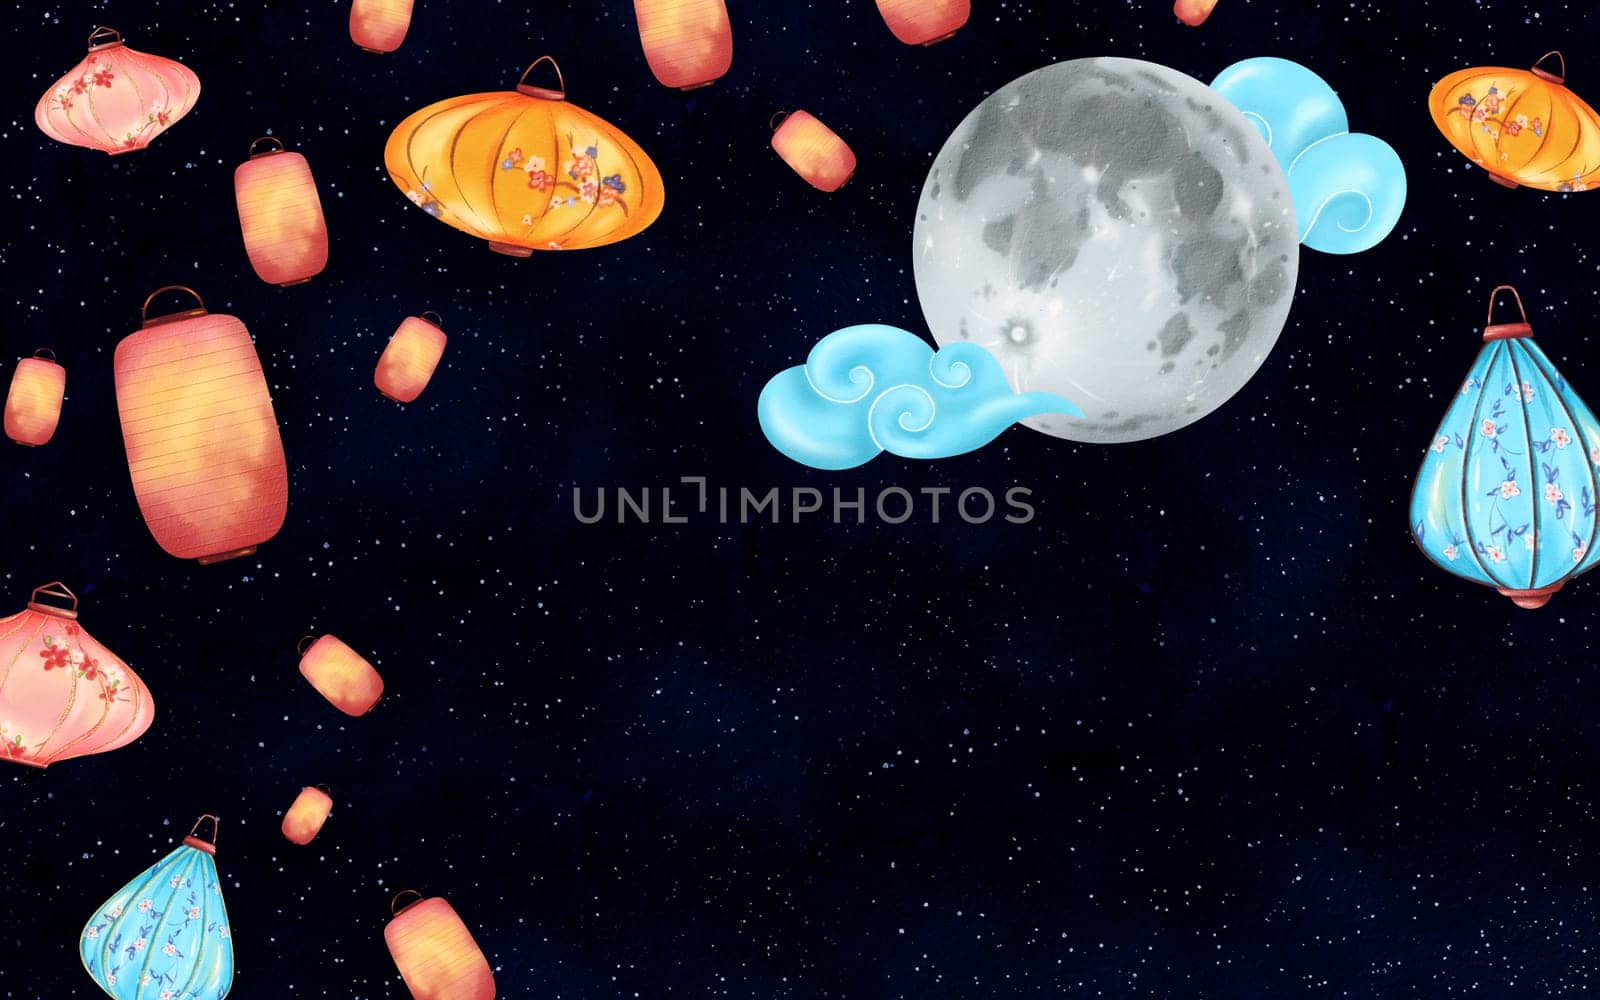 Starry night backdrop with moon and clouds, perfect for celebrating Chinese New Year or Lantern Festival. Assorted lanterns of different shapes, colors, and sizes. Watercolor illustration